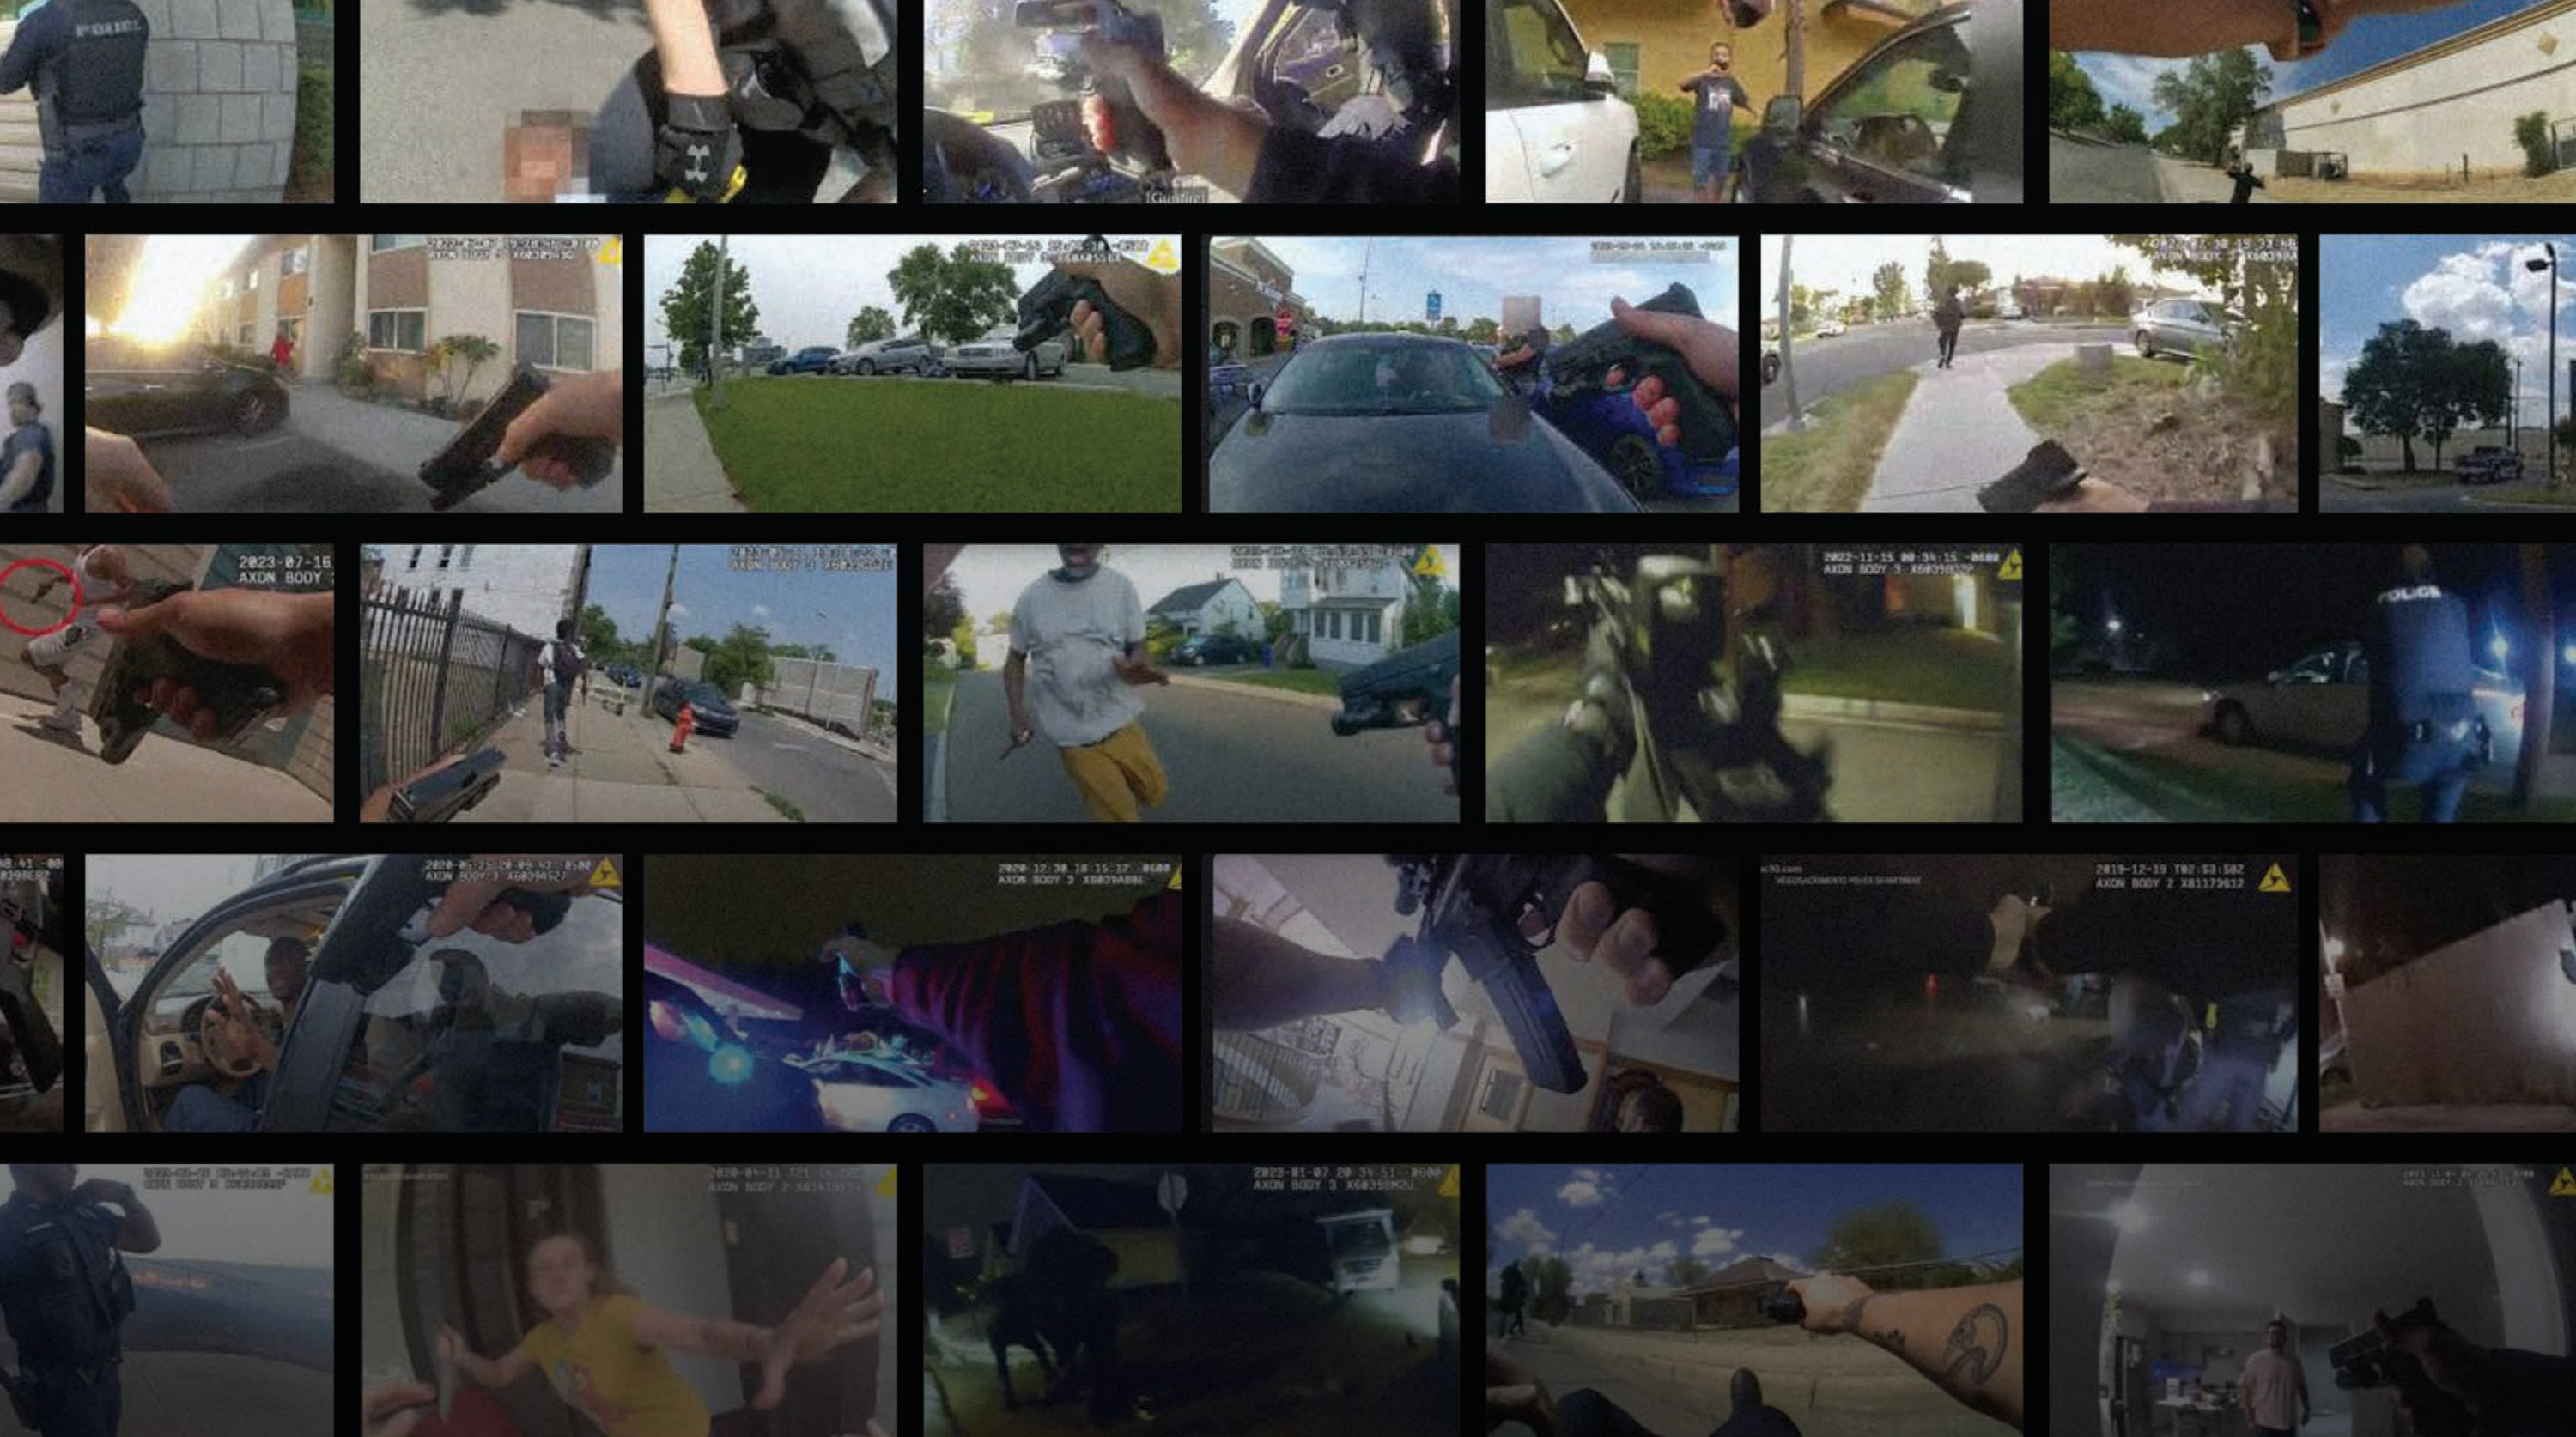 thumbnails of frames from bodycam videos in a grid